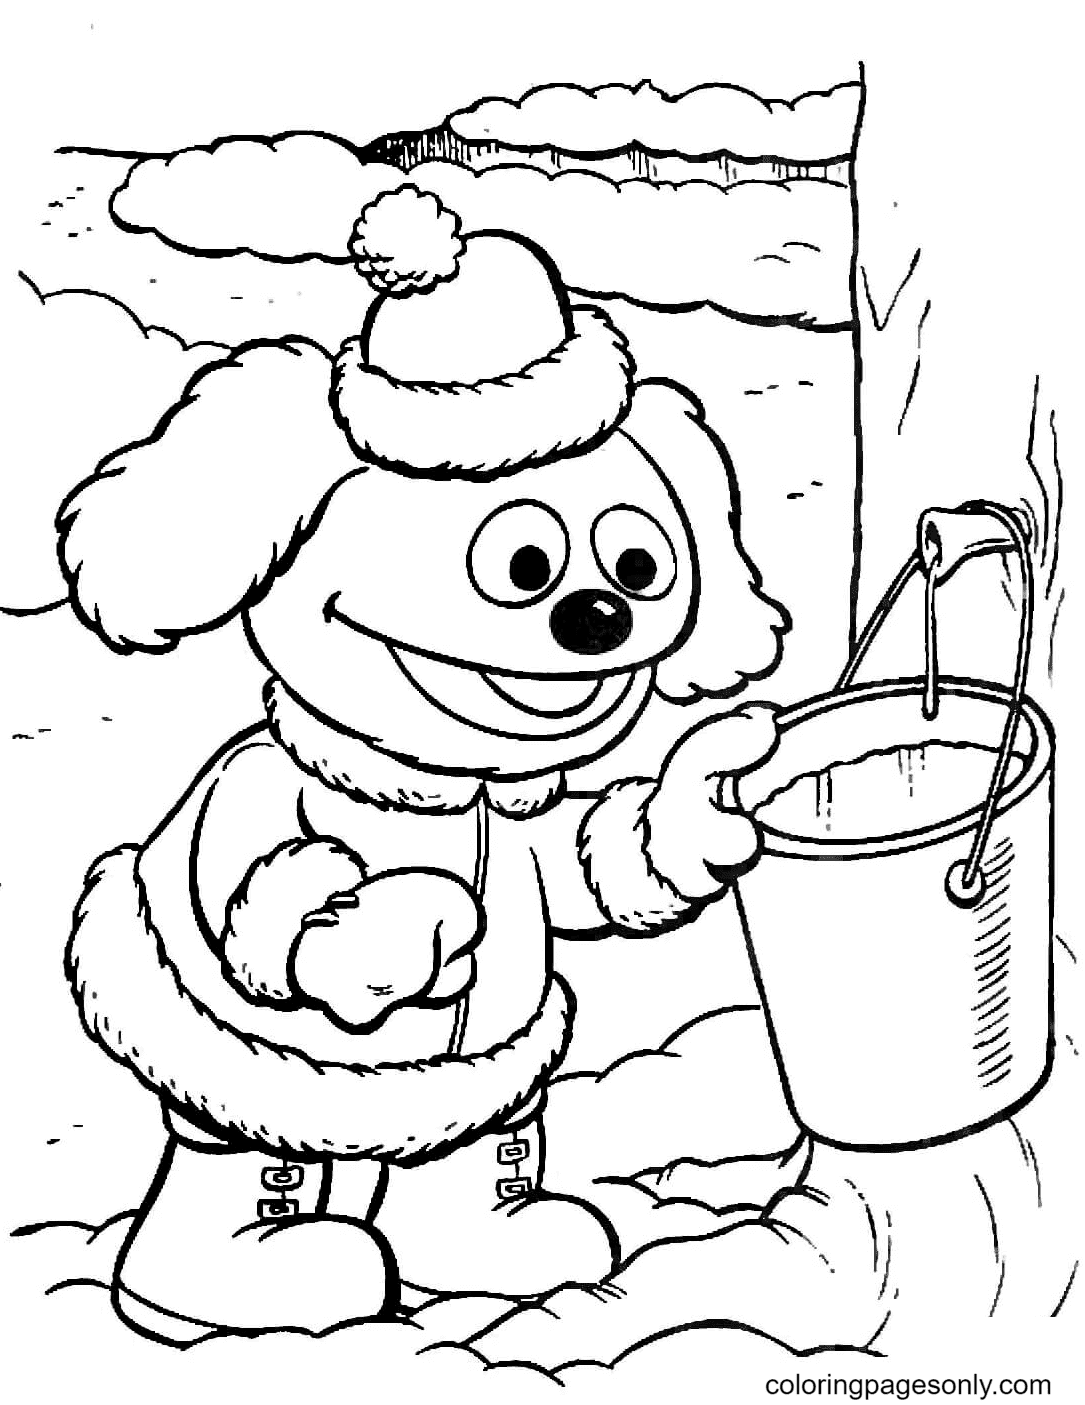 Rowlf Collects Some Water Coloring Pages